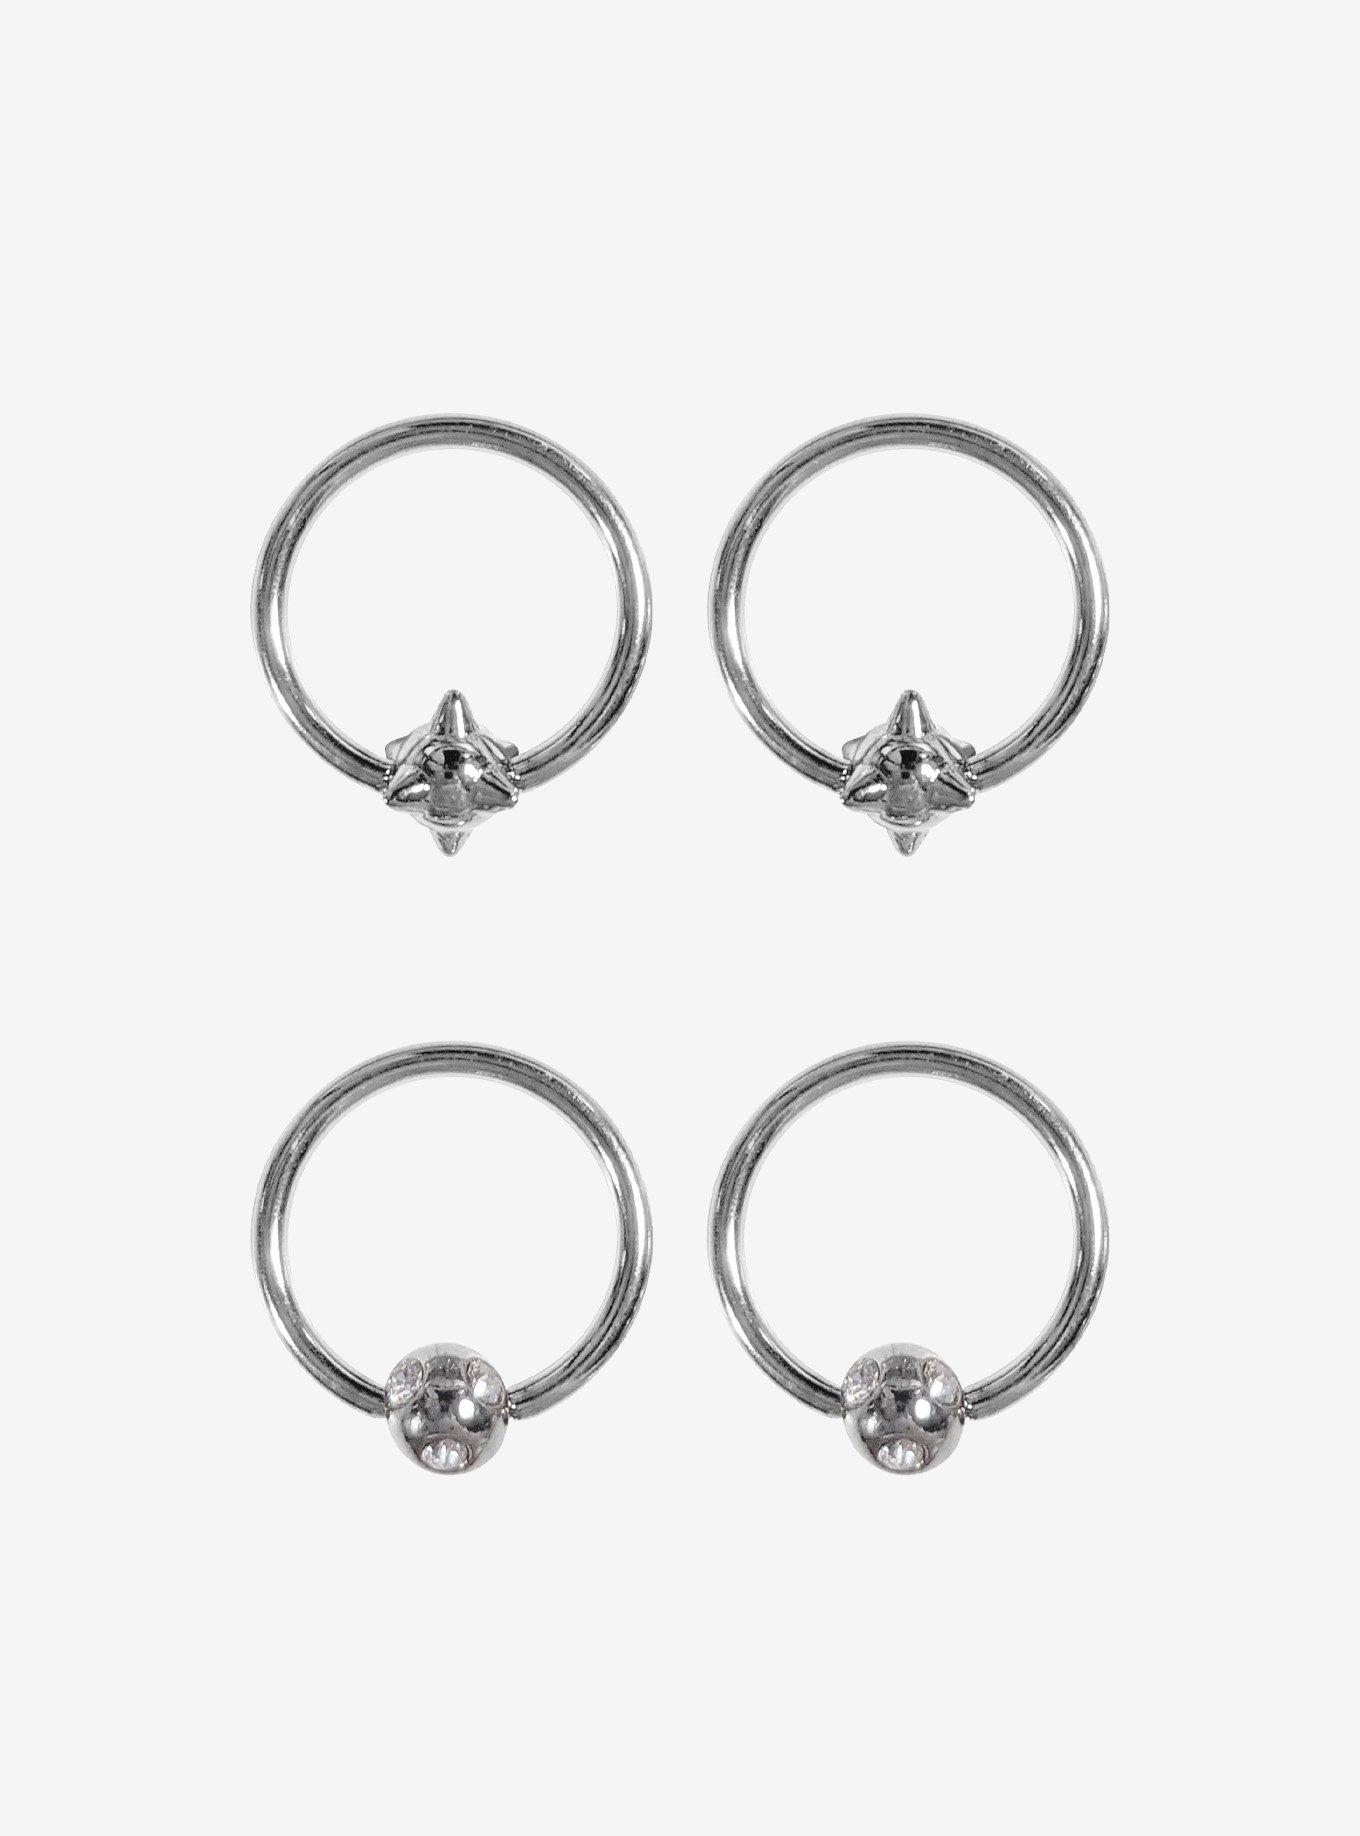 Steel Spiked Ball Captive Hoop 4 Pack, SILVER, hi-res